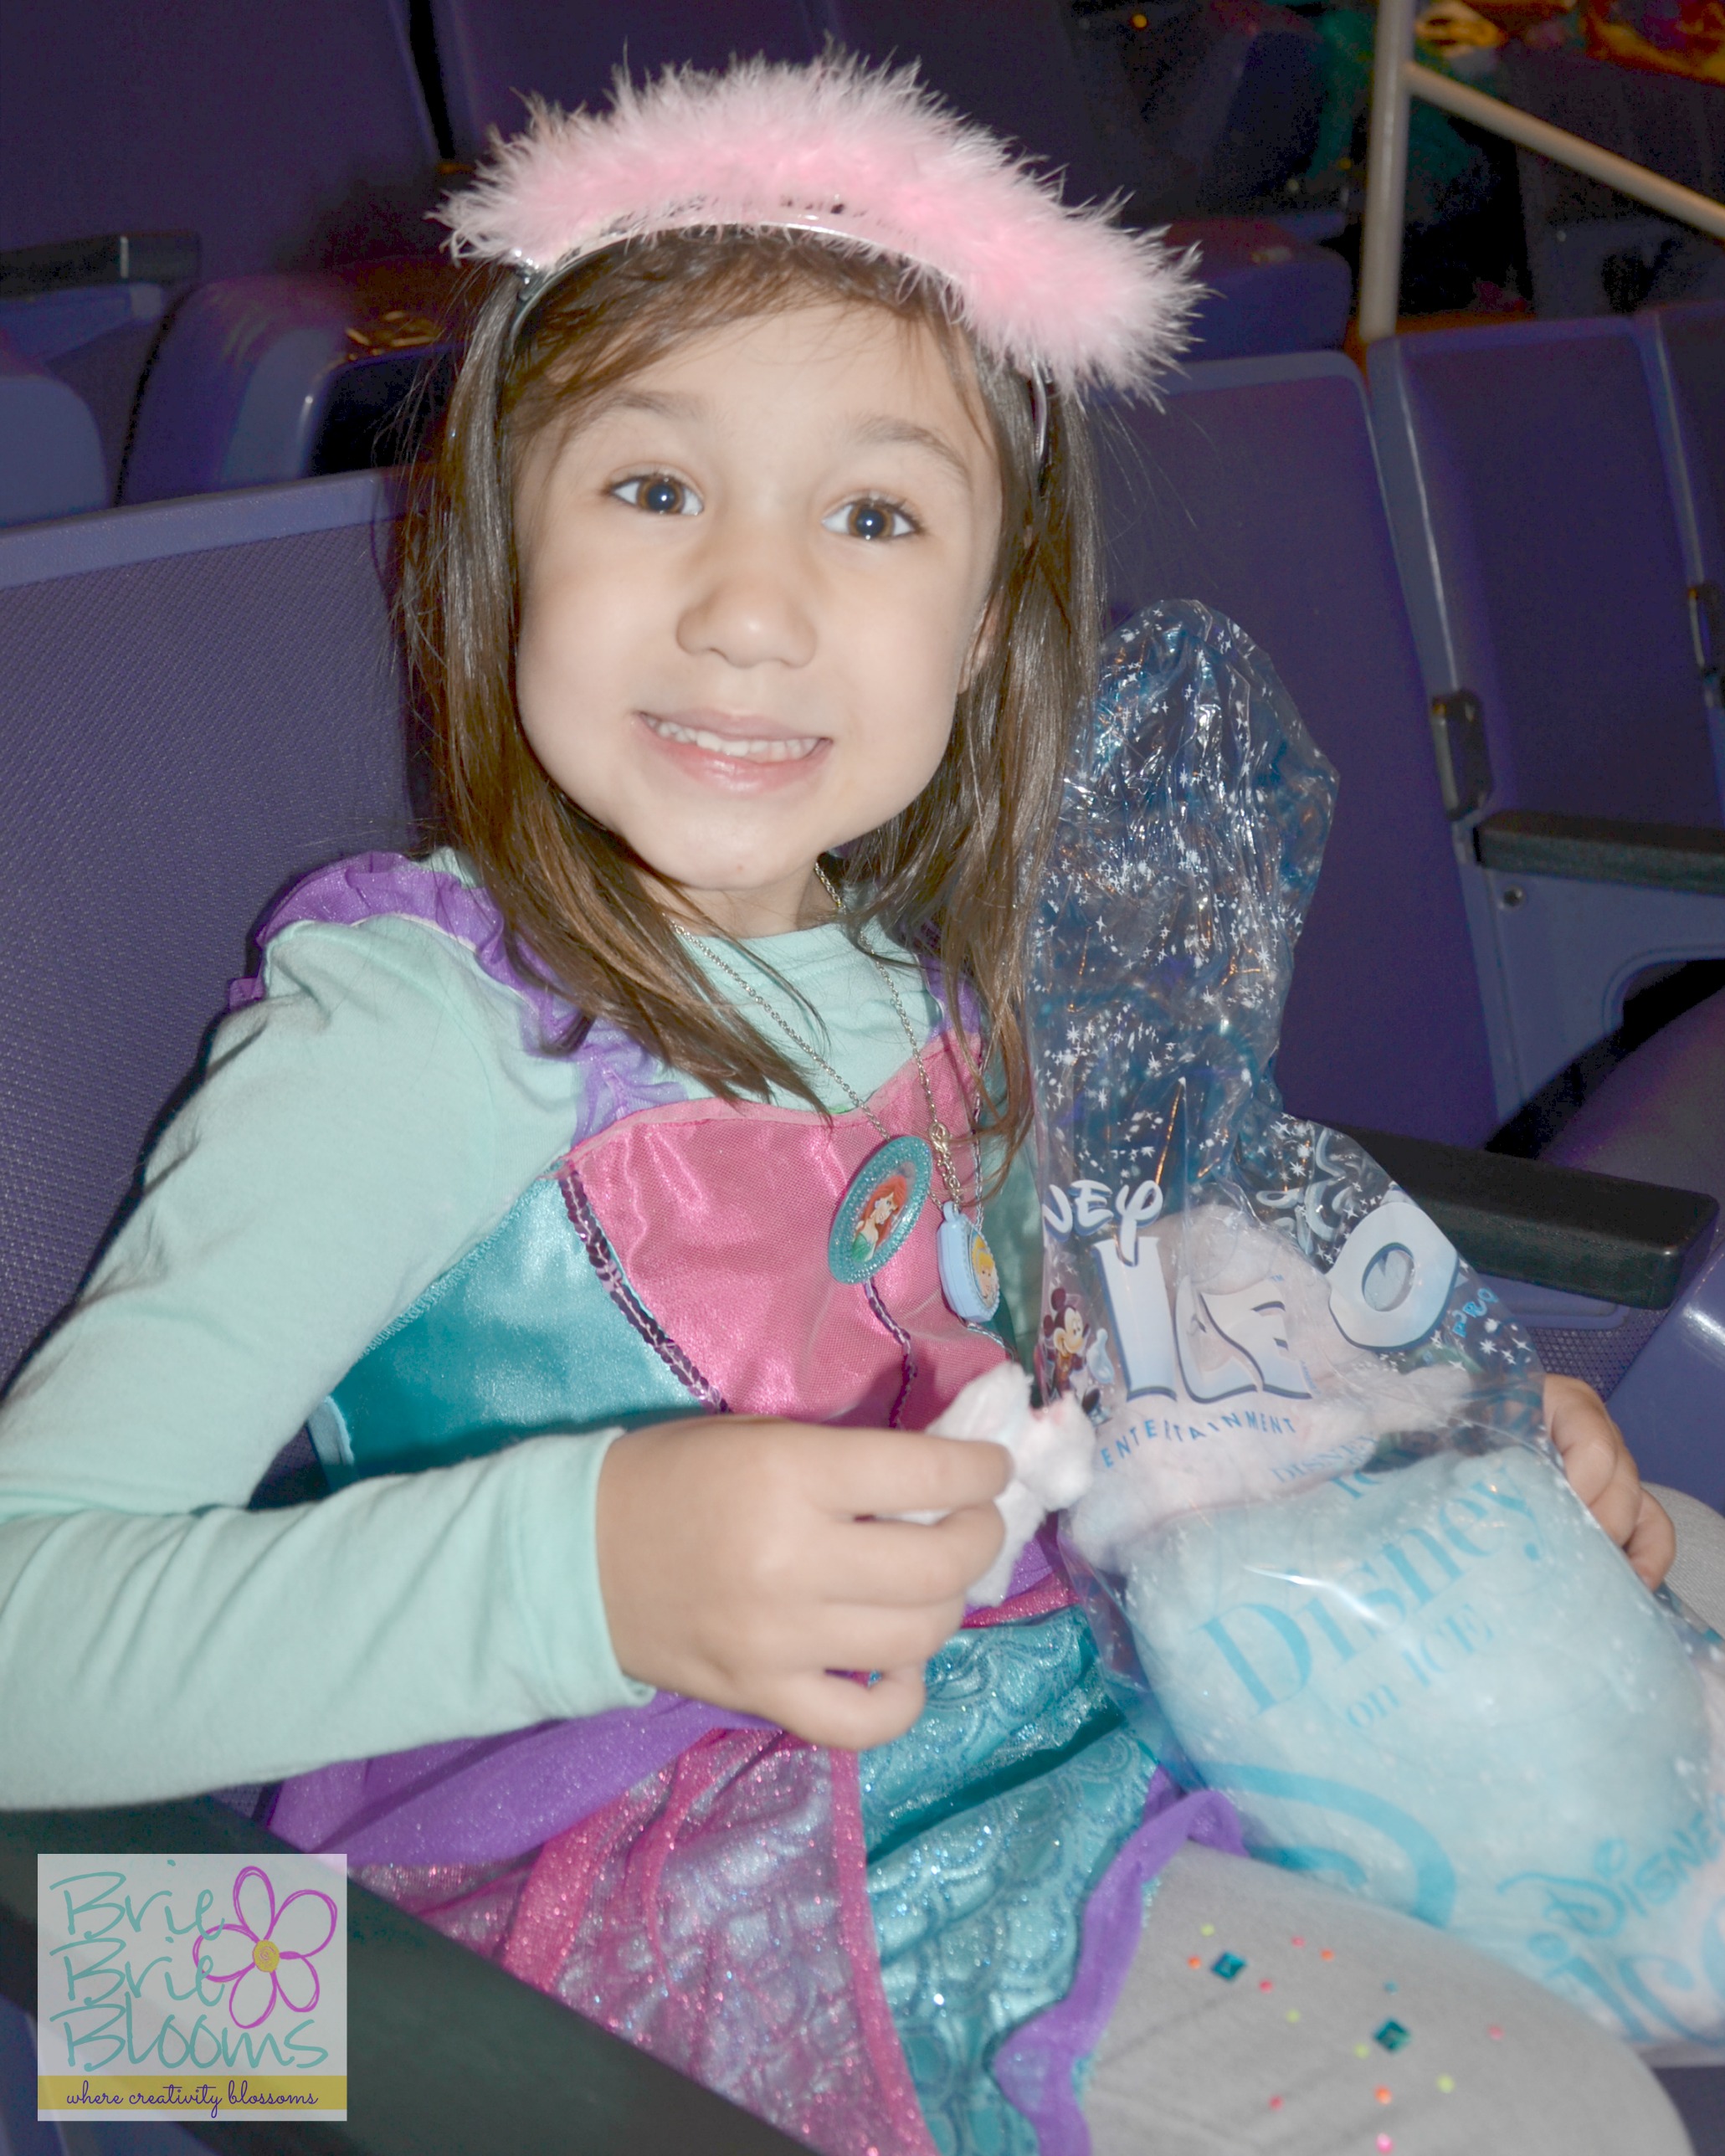 Cotton Candy at Disney On Ice Rockin' Ever After